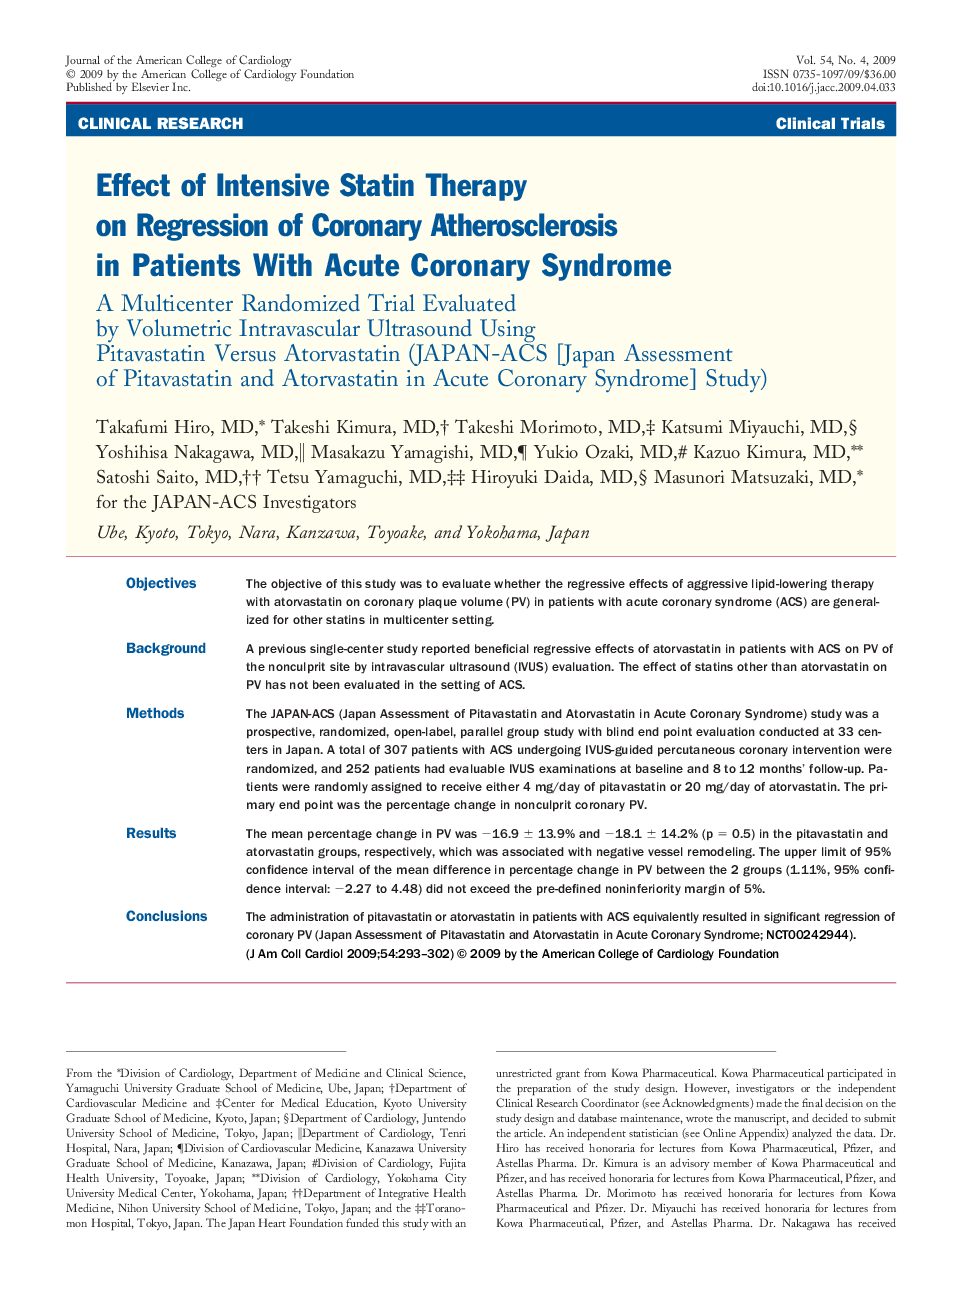 Effect of Intensive Statin Therapy on Regression of Coronary Atherosclerosis in Patients With Acute Coronary Syndrome : A Multicenter Randomized Trial Evaluated by Volumetric Intravascular Ultrasound Using Pitavastatin Versus Atorvastatin (JAPAN-ACS [Japa